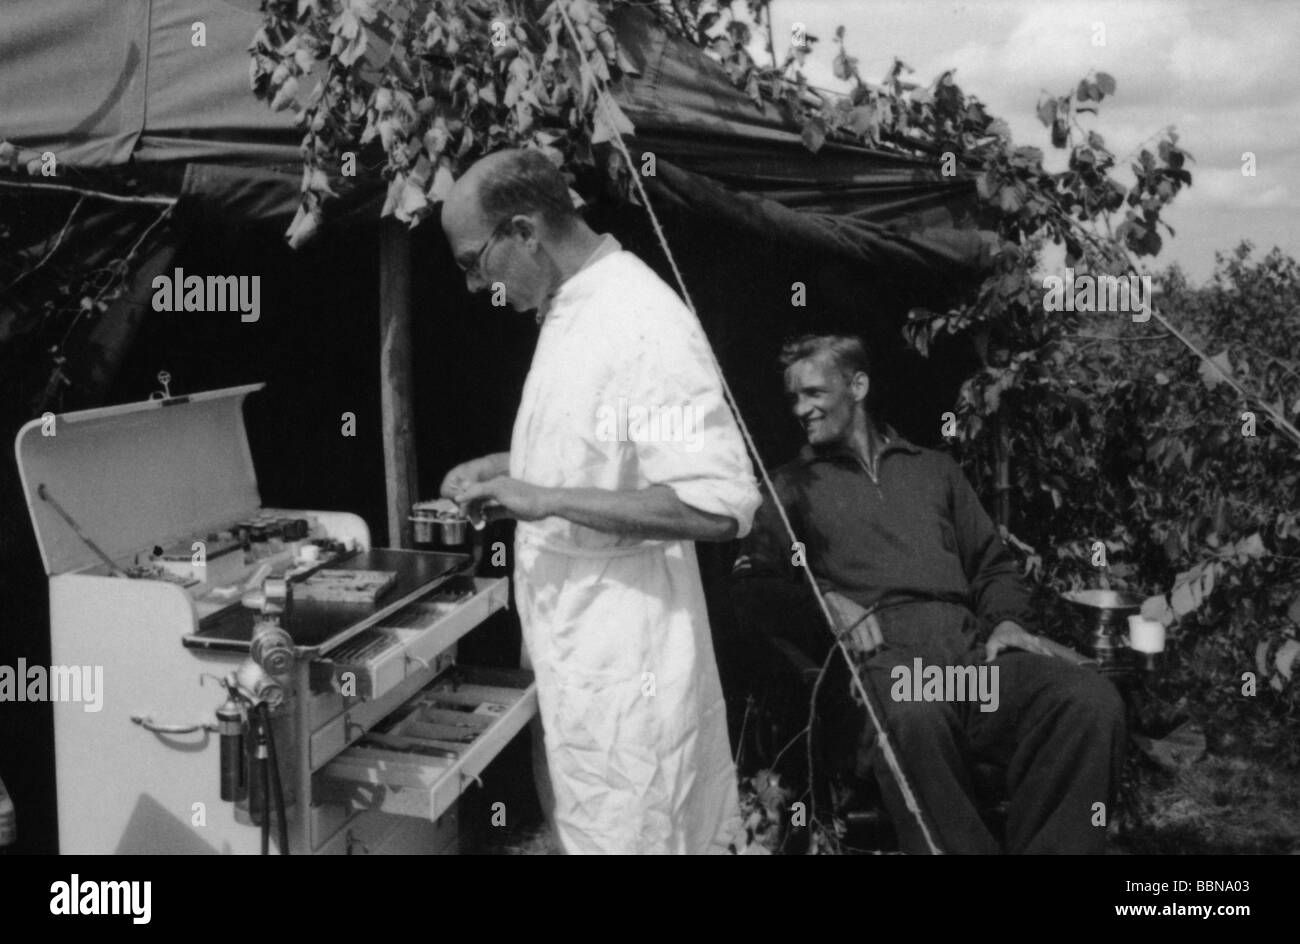 events, Second World War / WWII, Russia 1941, German field hospital near Smolensk, 19.8.1941, dentist station in front of a tent, Stock Photo